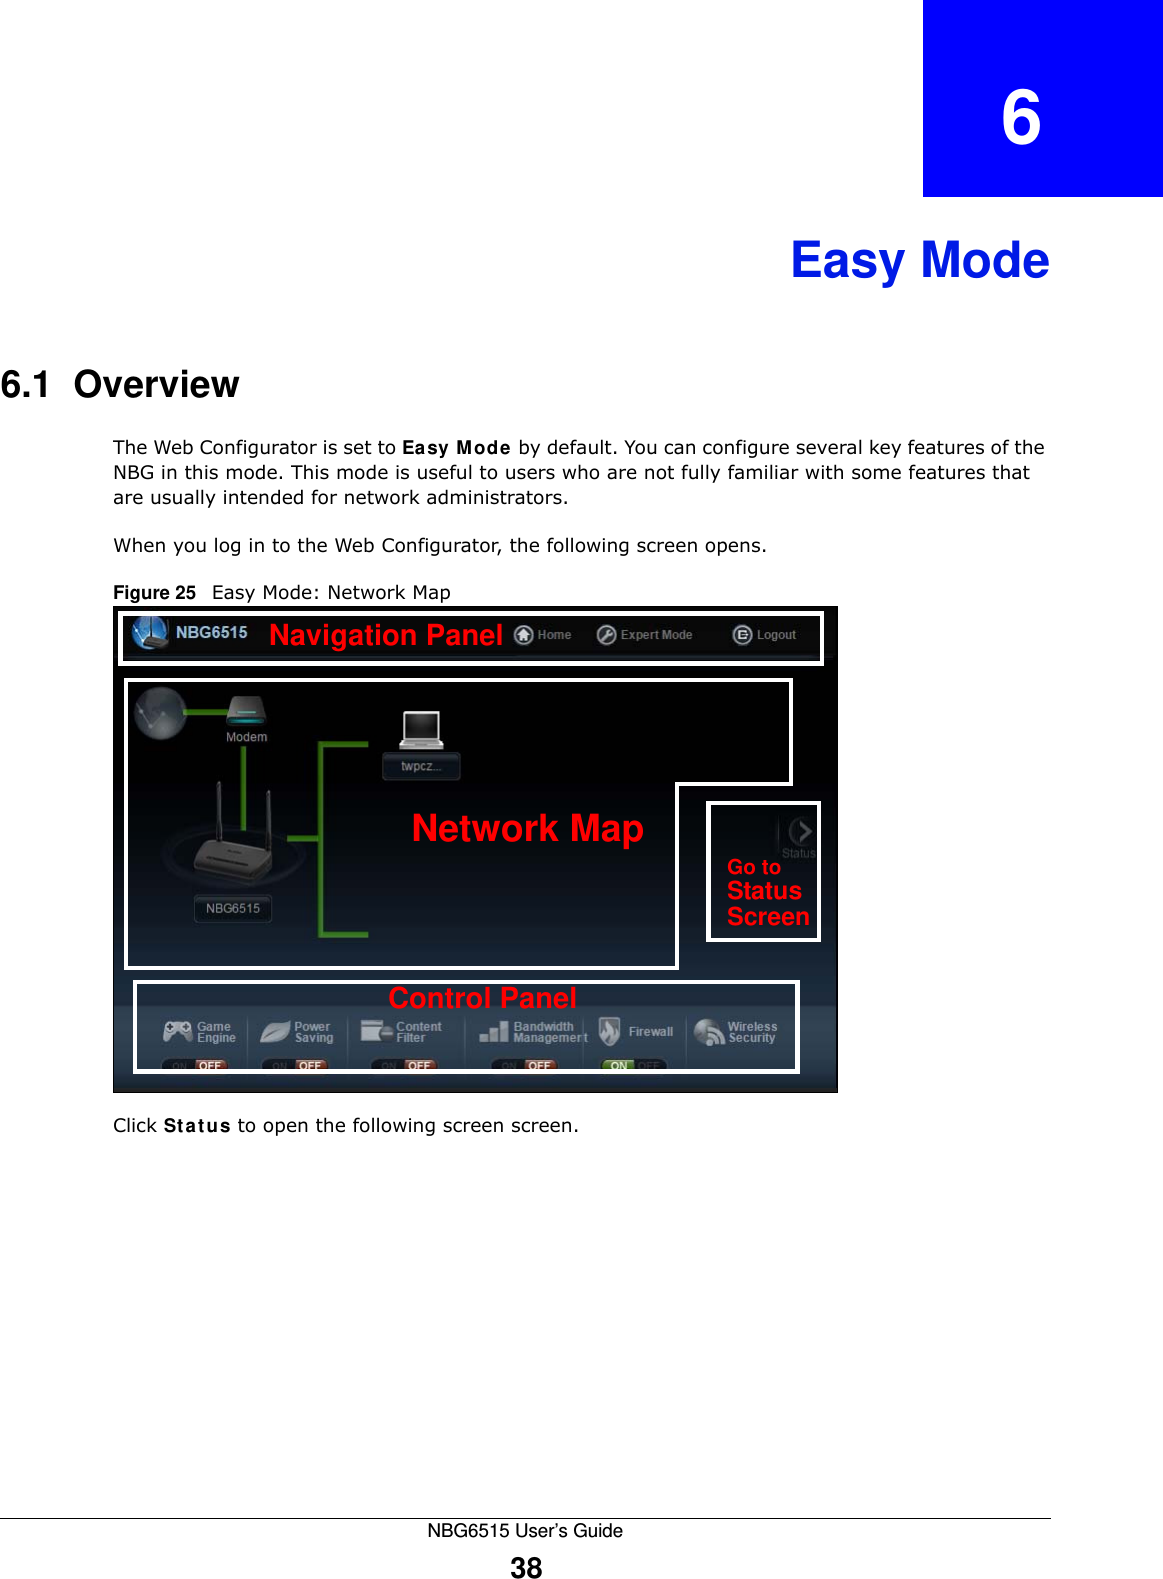 NBG6515 User’s Guide38CHAPTER   6Easy Mode6.1  OverviewThe Web Configurator is set to Easy Mode by default. You can configure several key features of the NBG in this mode. This mode is useful to users who are not fully familiar with some features that are usually intended for network administrators.When you log in to the Web Configurator, the following screen opens.Figure 25   Easy Mode: Network Map Click Status to open the following screen screen.Network MapControl PanelGo toStatusScreenNavigation Panel